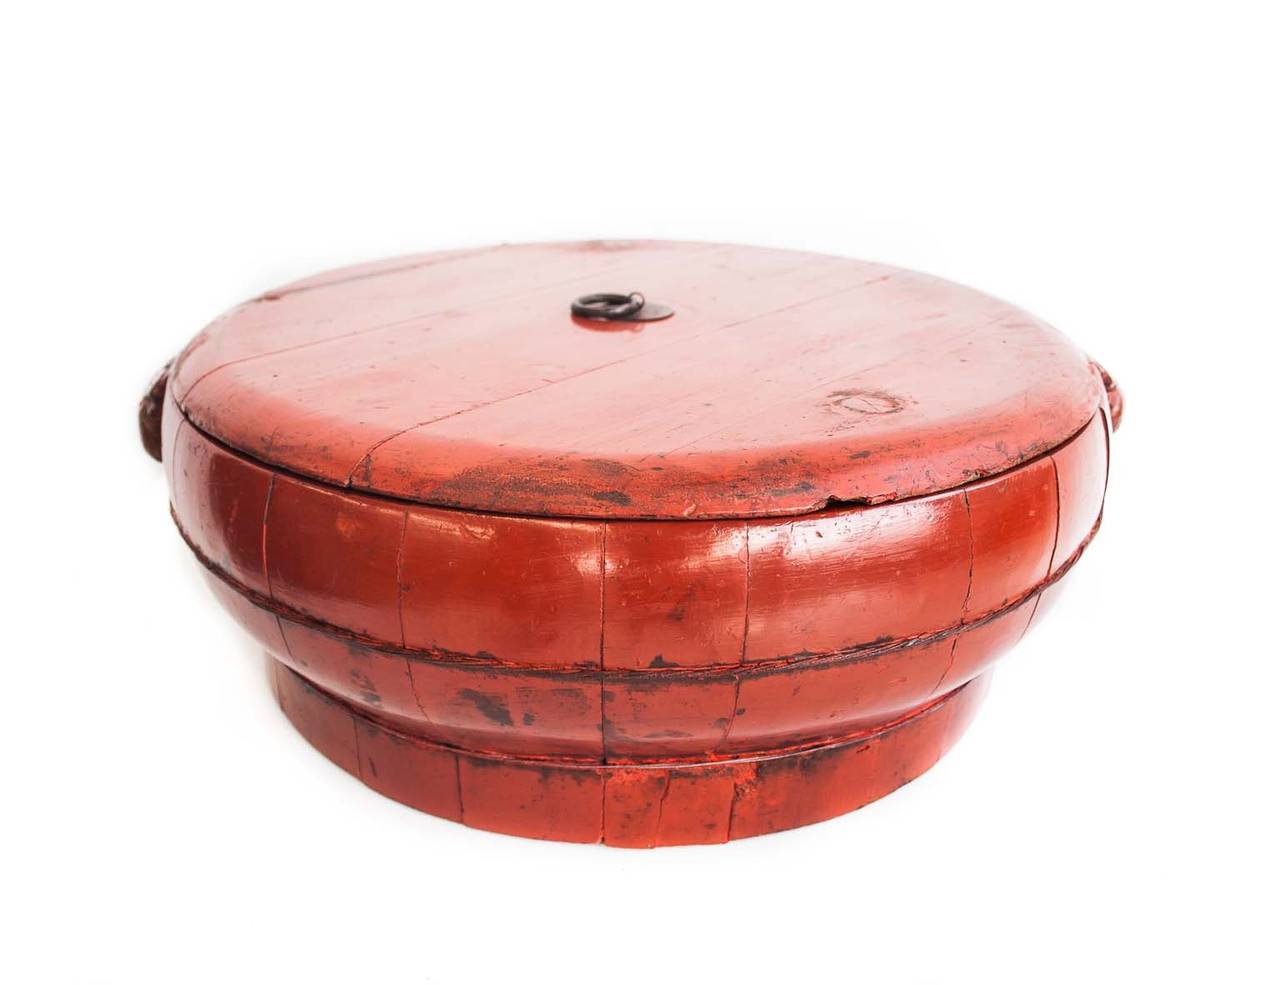 Big flat wooden box with lid, in warm Chinese red colour. Lid has a metal ring. This is an old box from Zhejiang province, China.